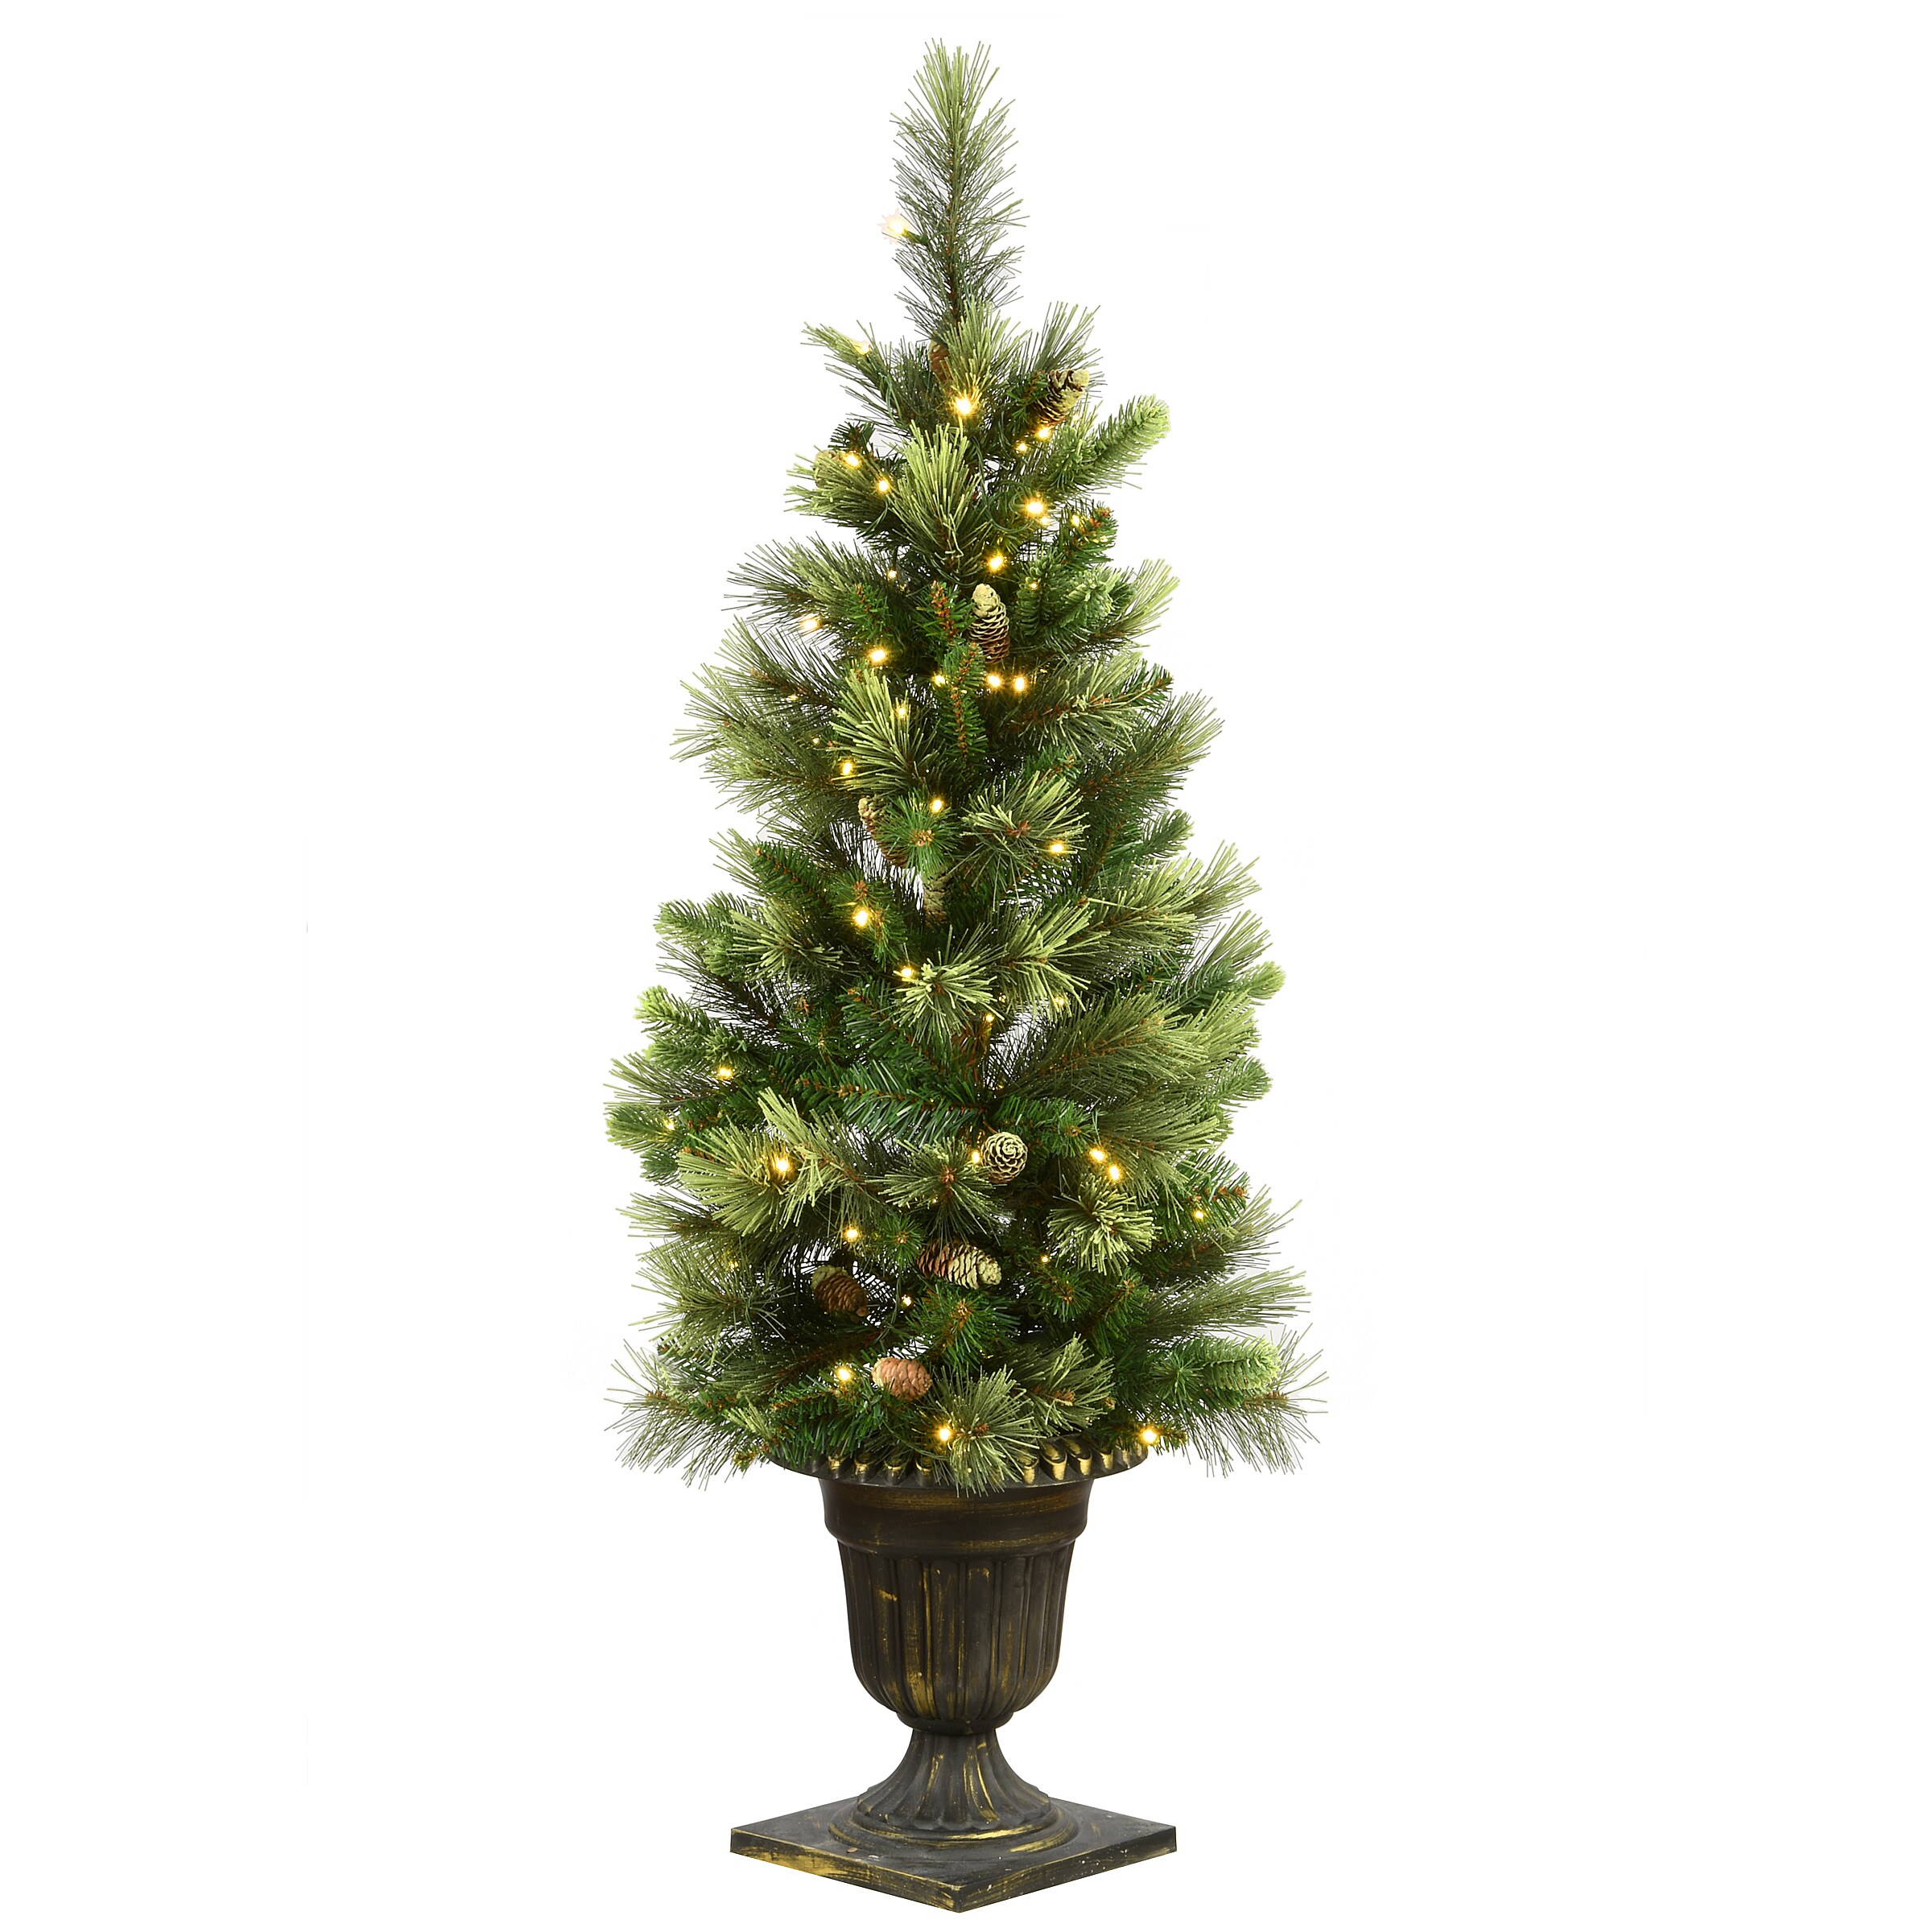 24 Inch Wide Christmas Trees at Lowes.com